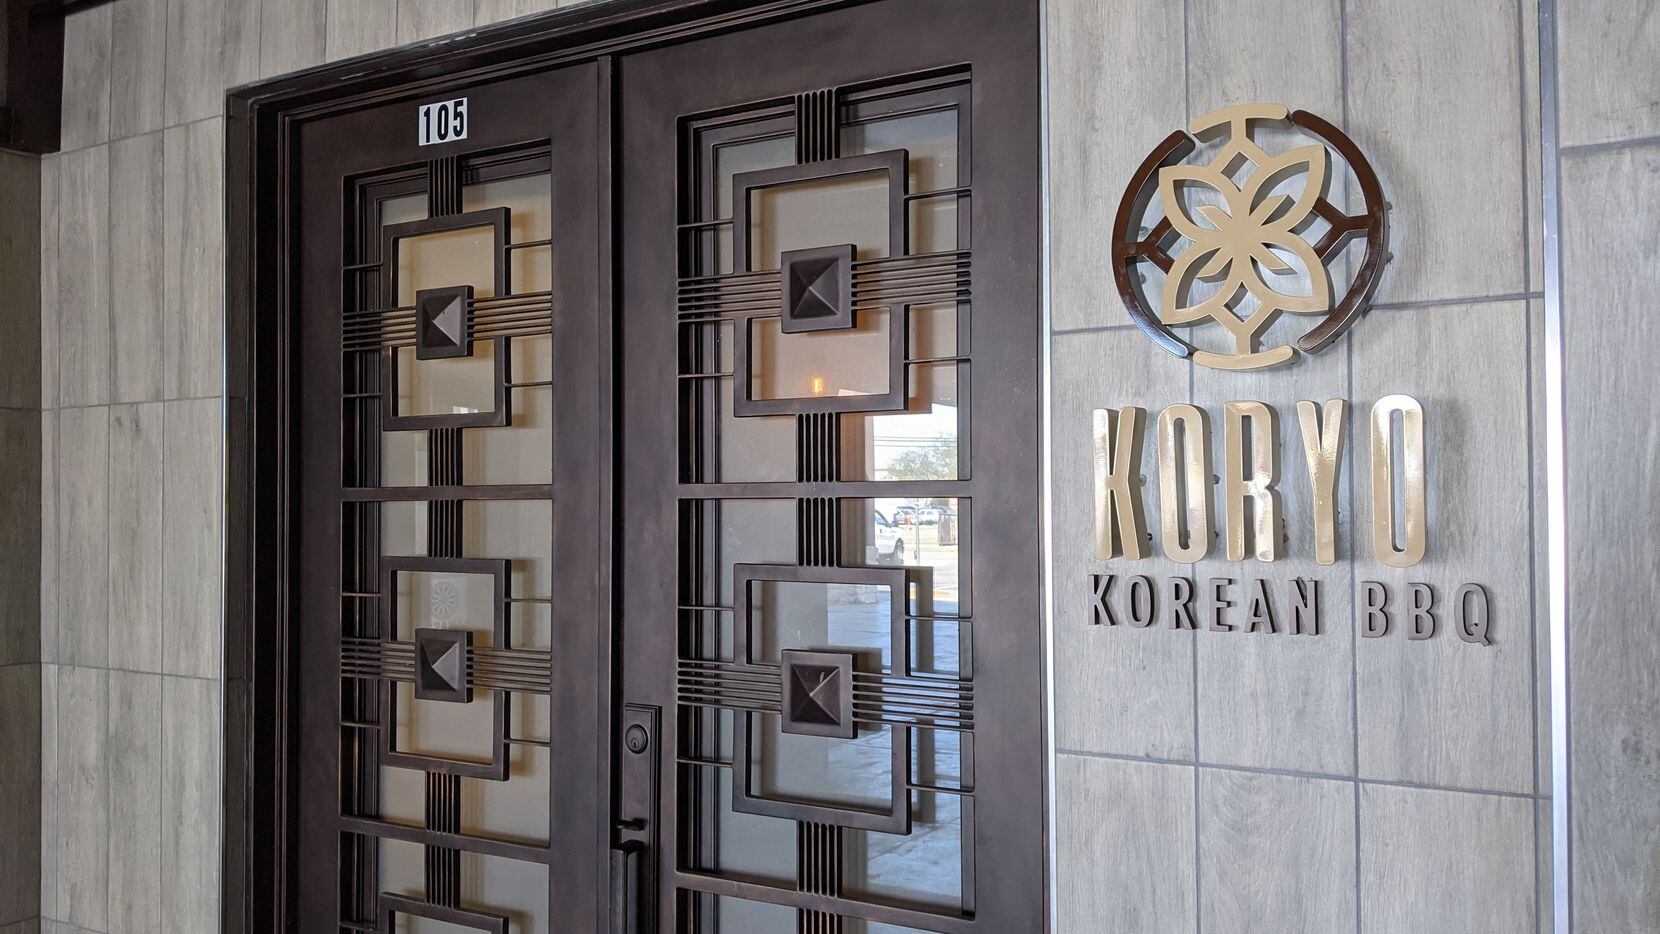 Koryo Korean BBQ's new front doors hint at the opulently redesigned dining room inside.